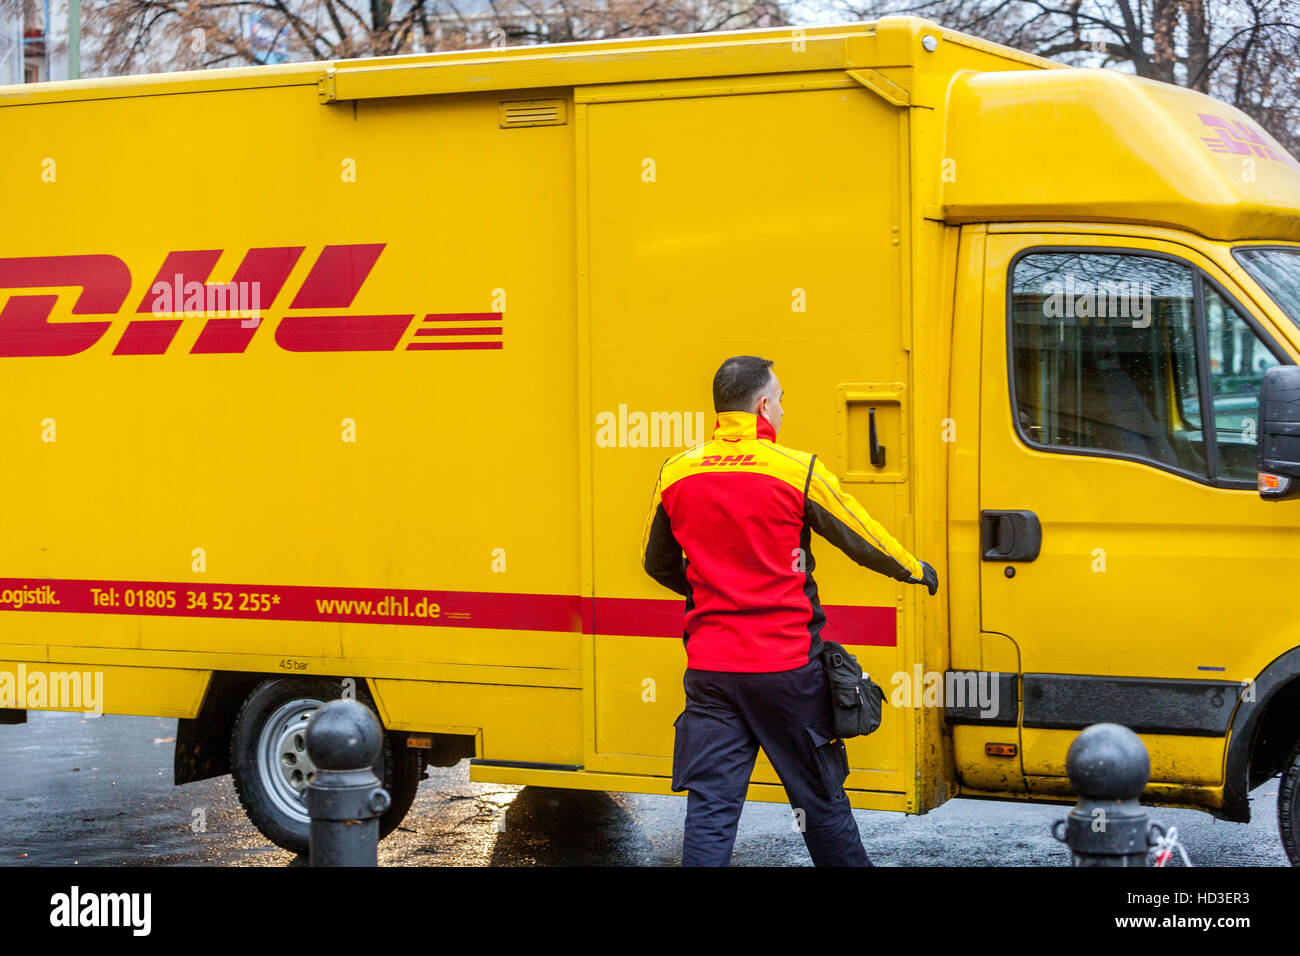 DHL van delivery Berlin, Germany Europe Stock Photo - Alamy